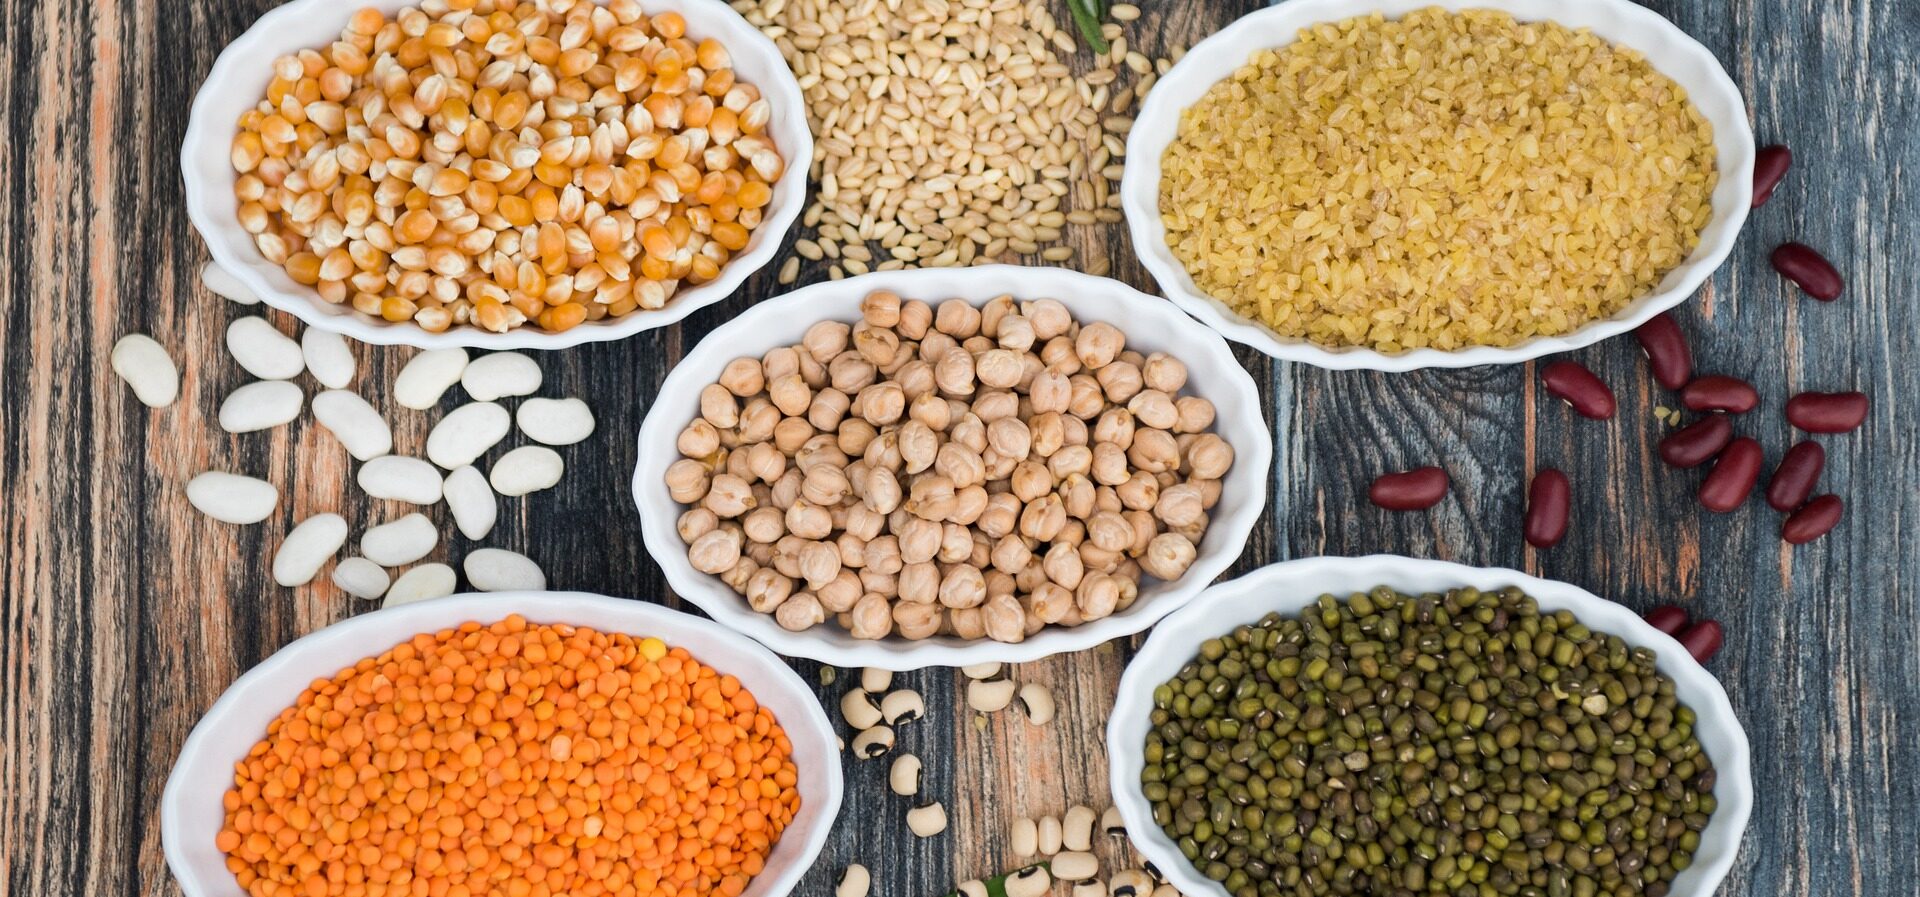 choose healthy carbs, like these lentils and legumes